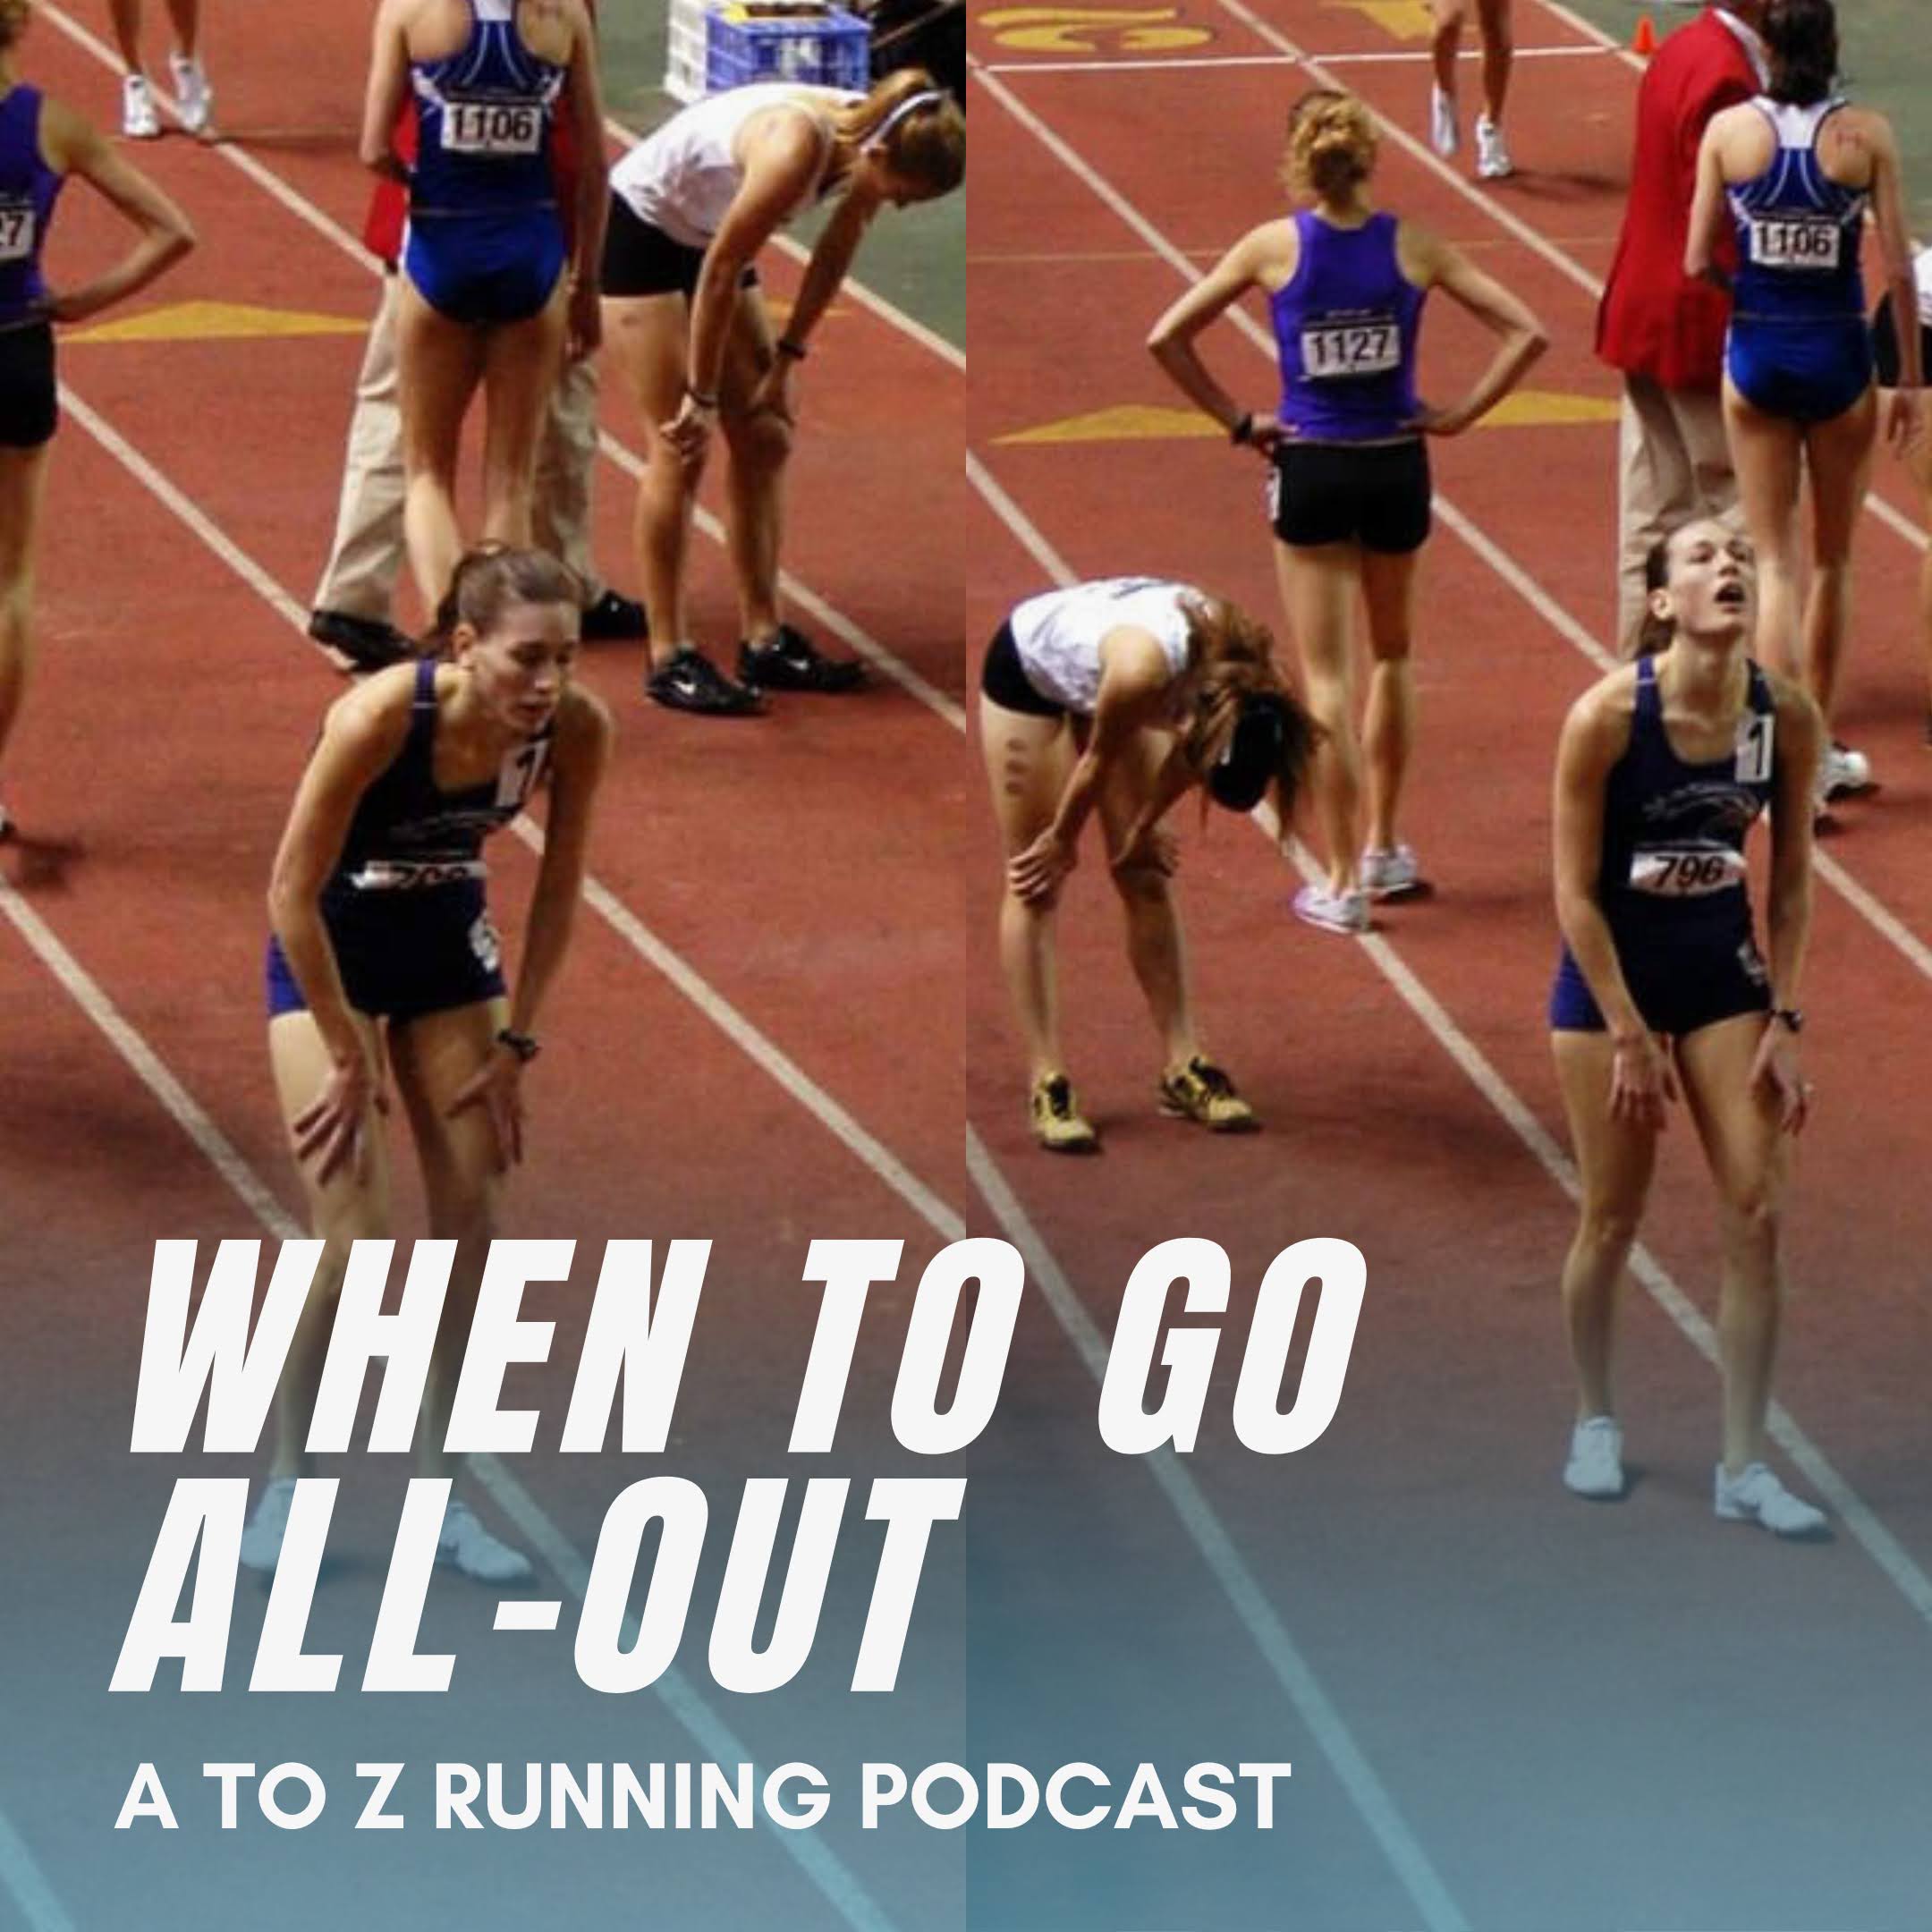 when to go all out podcast episode cover with a runner on the track after race very tired with mouth open.